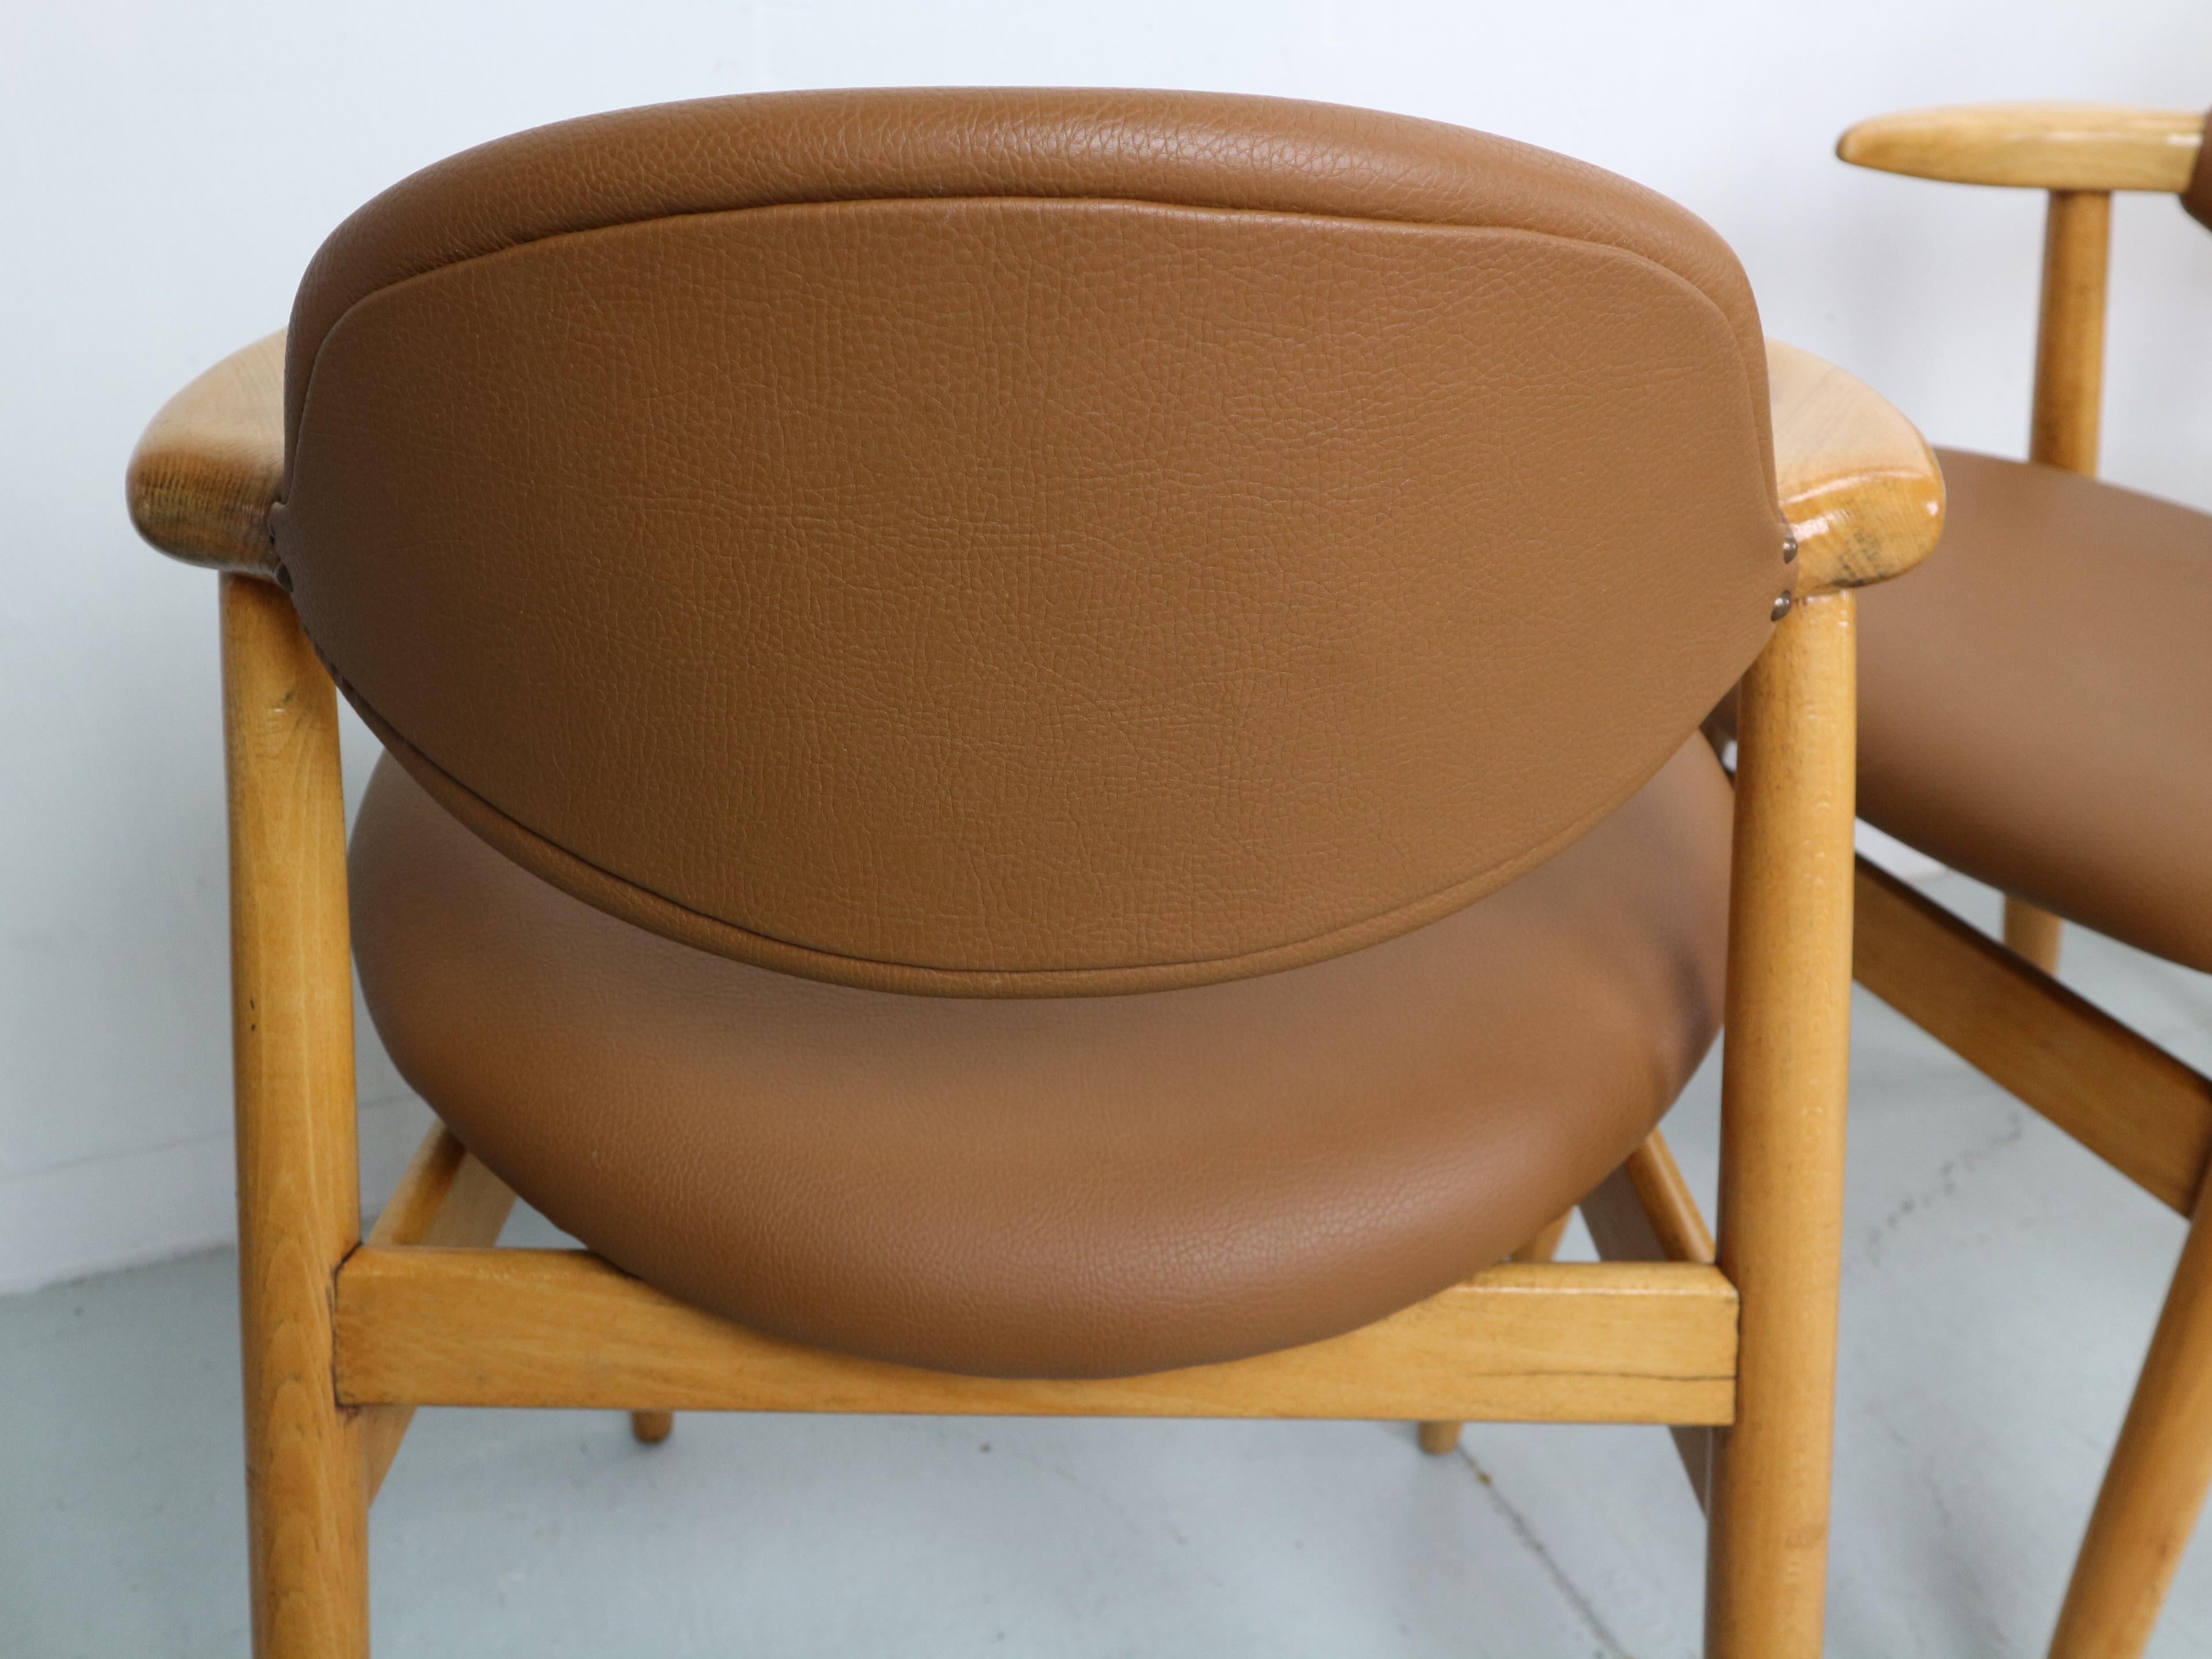 Faux Leather Set of 4 Tijsseling Cowhorn Chair Propos Hulmefa, the Netherlands, 1960